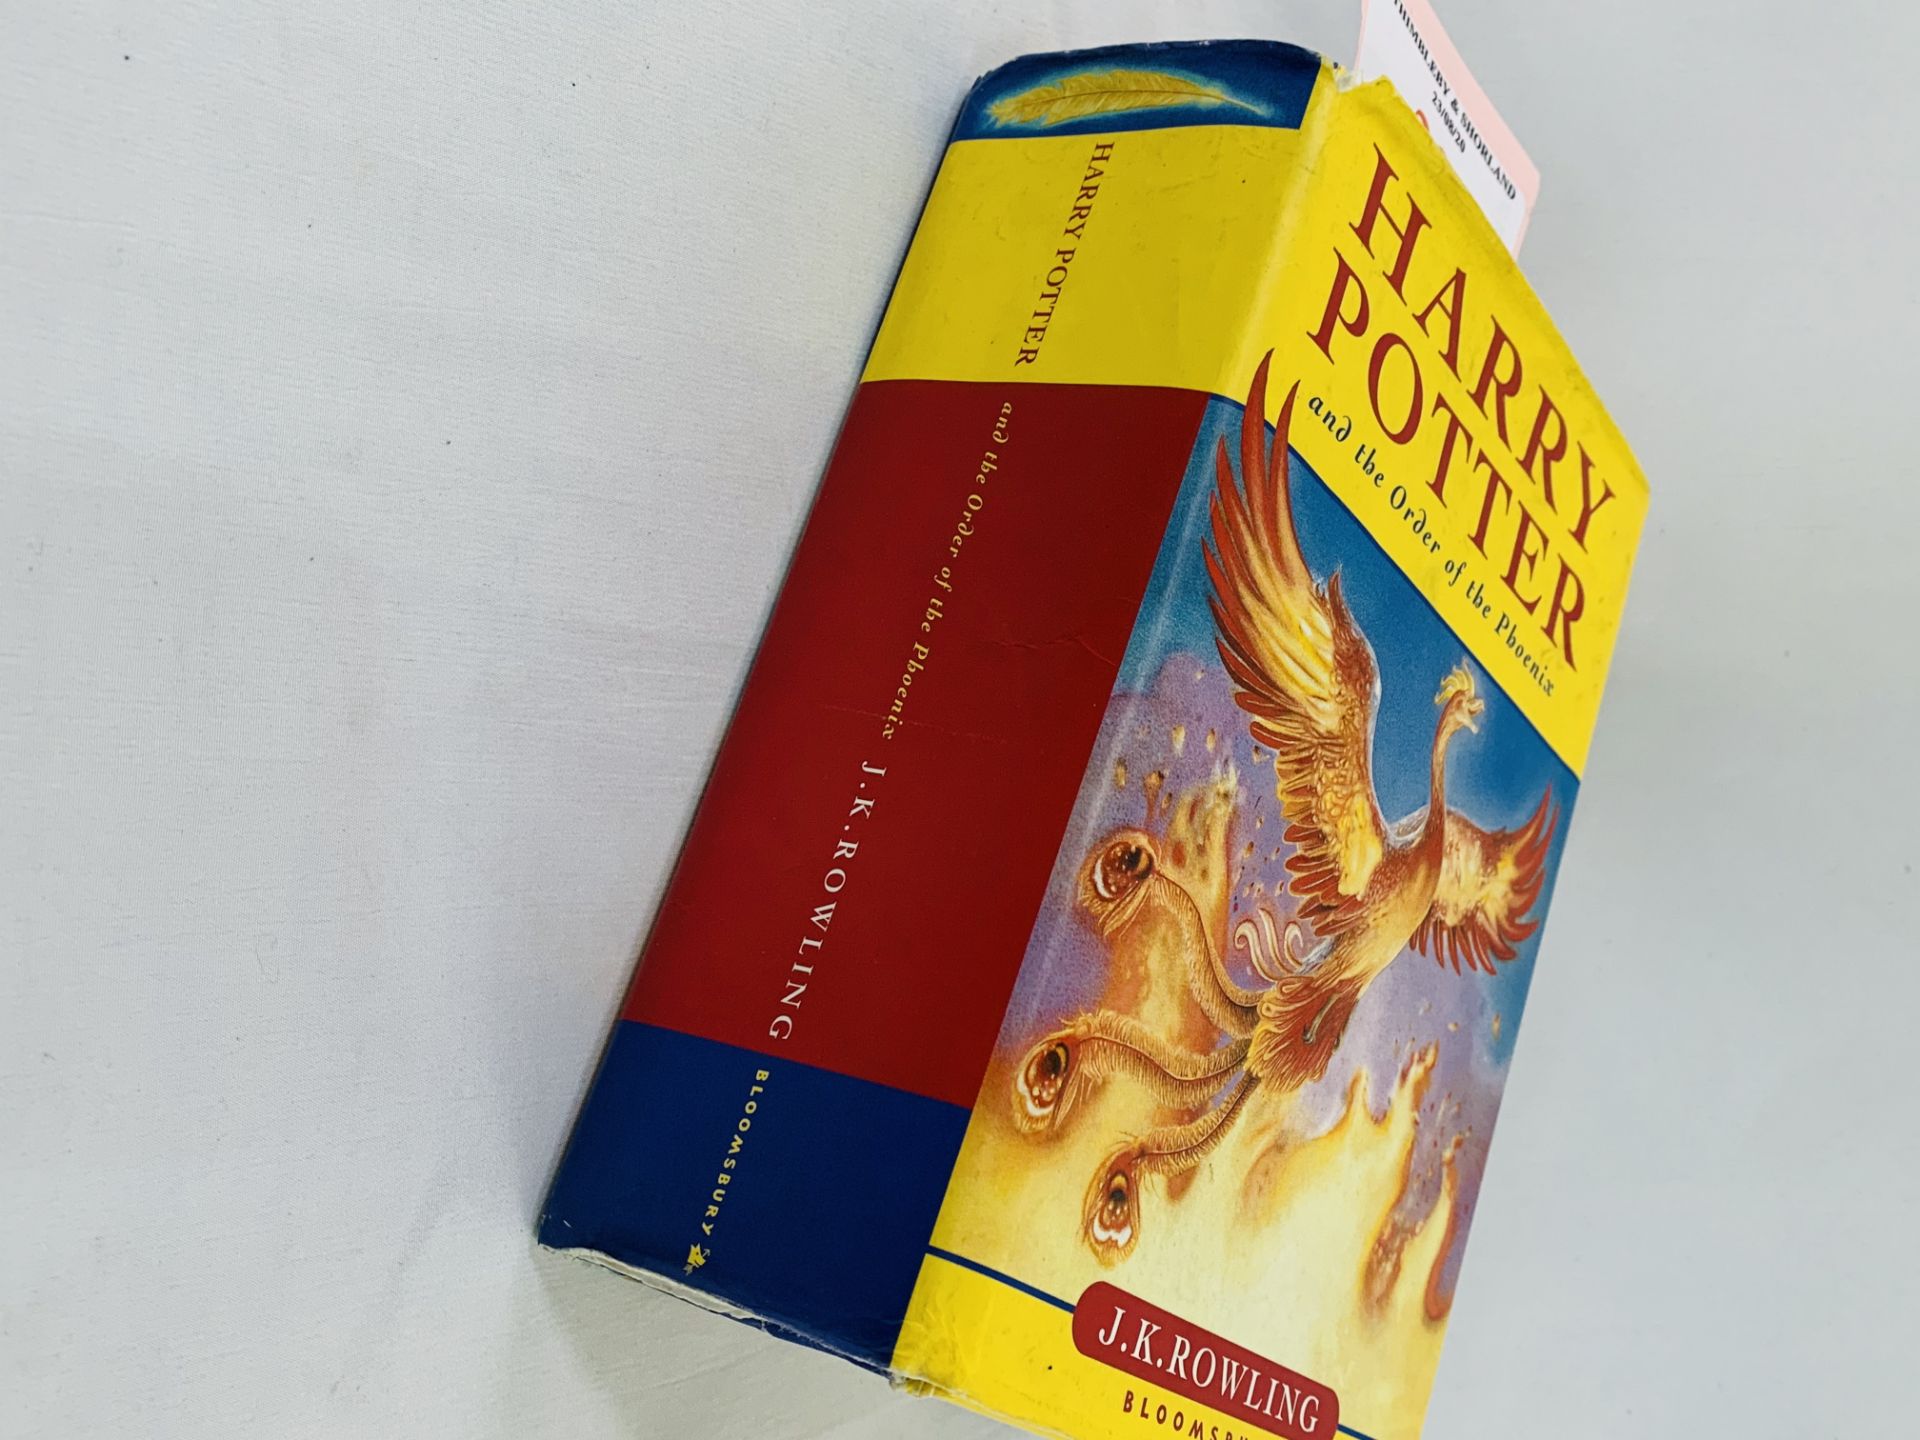 Harry Potter first edition "The Order of the Phoenix". - Image 2 of 2